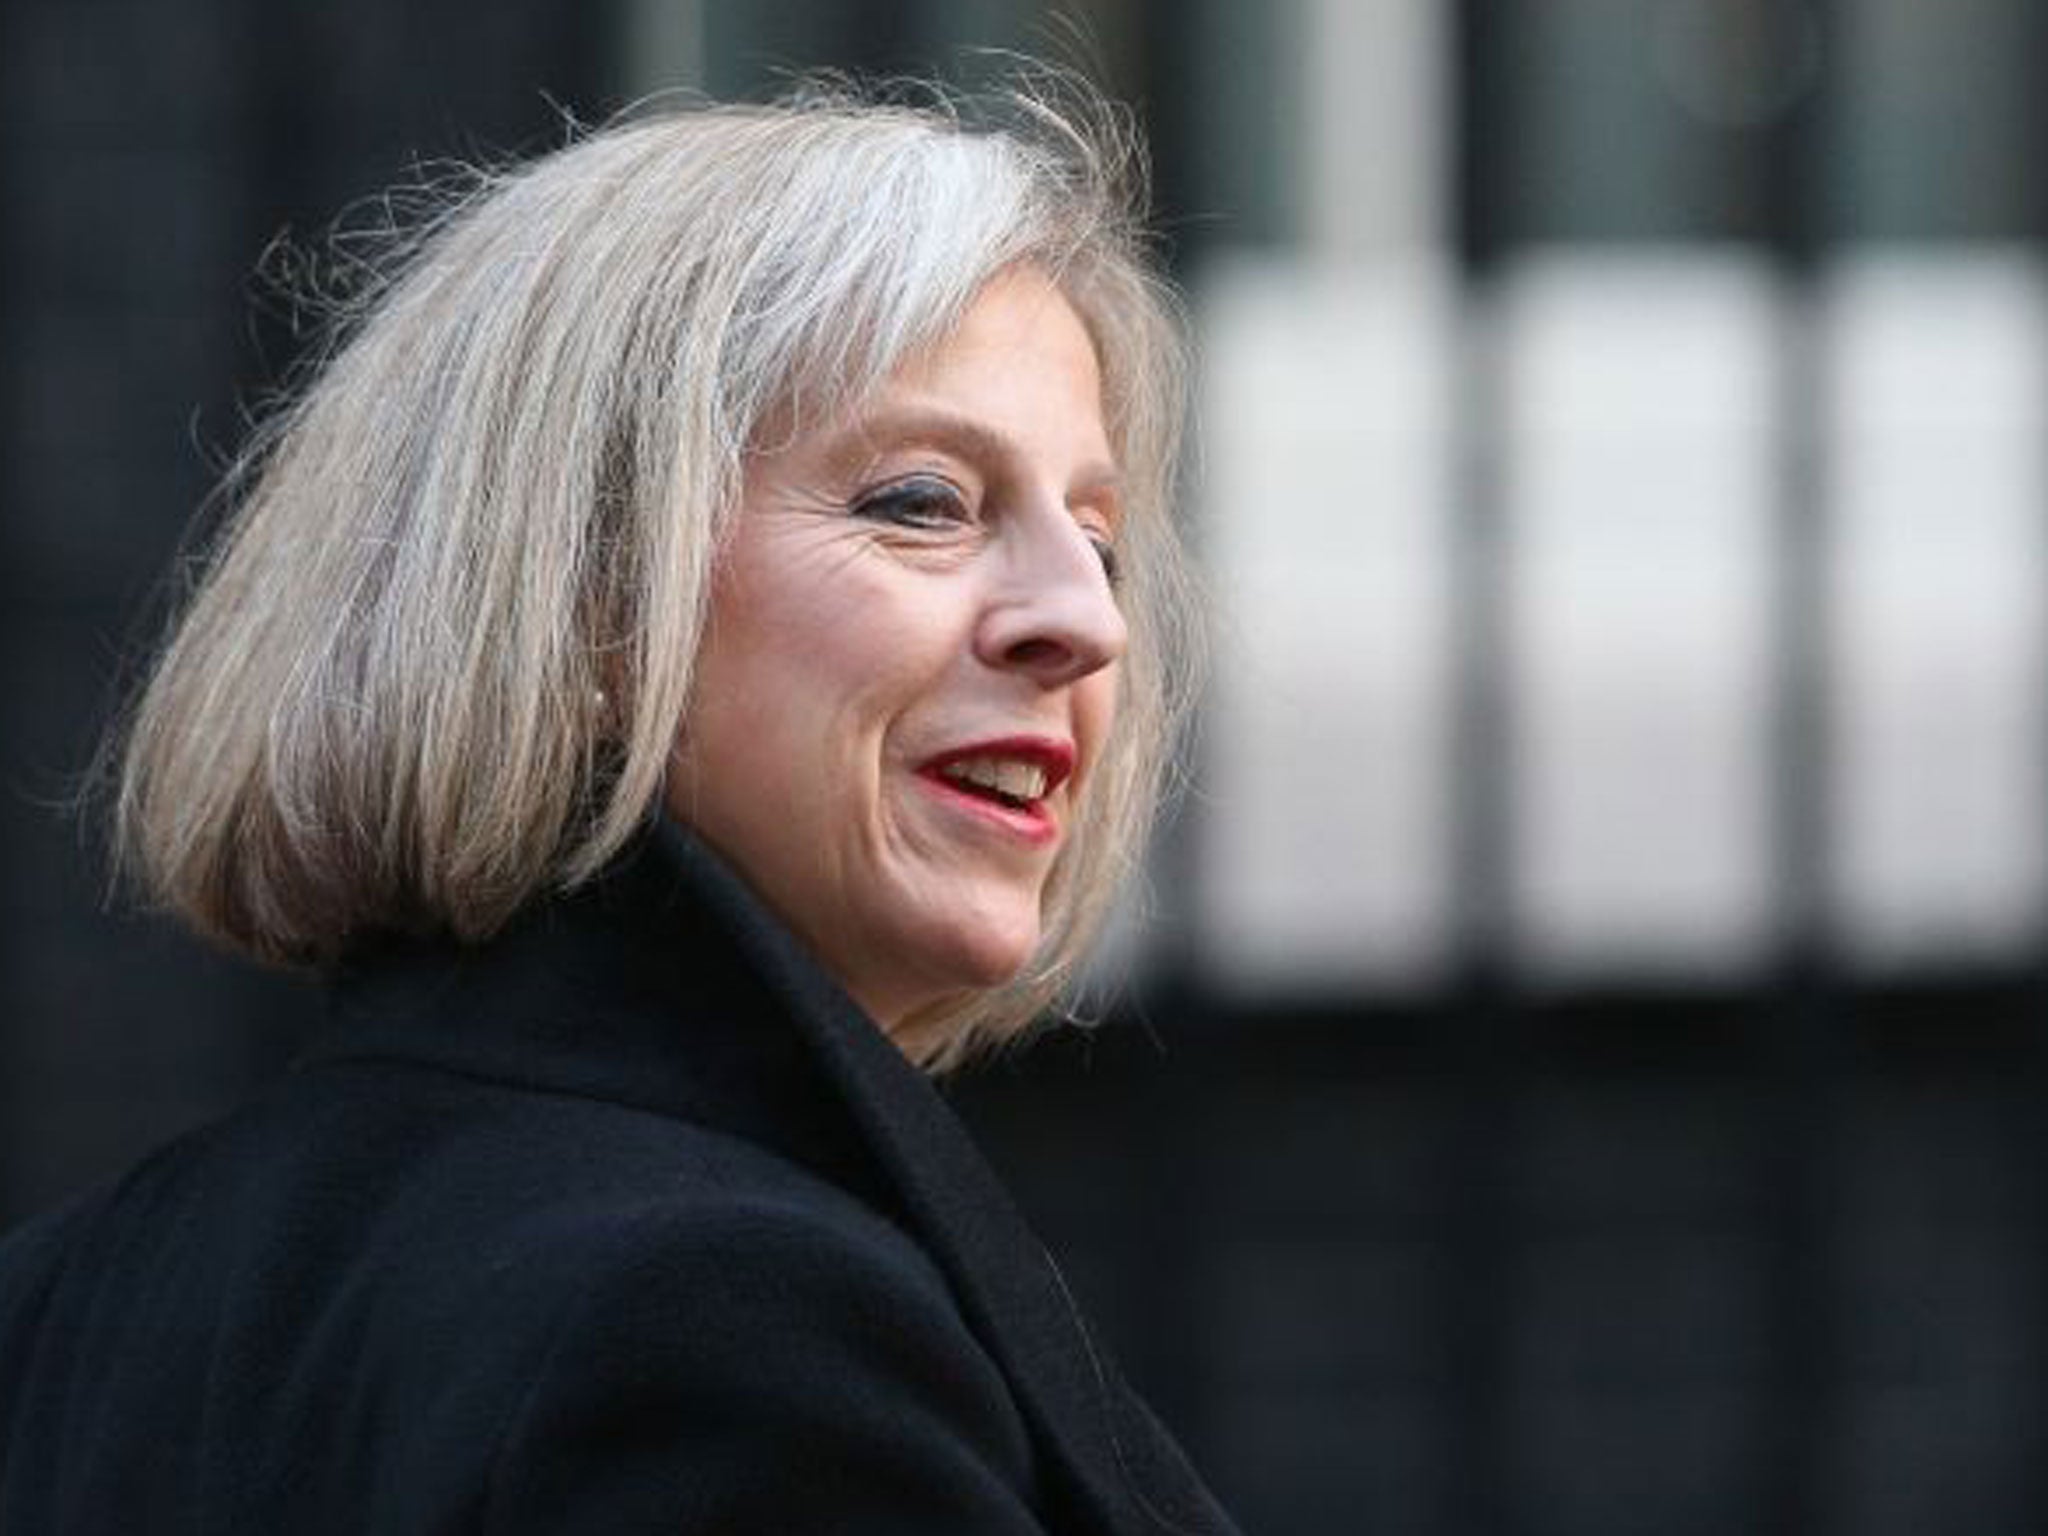 Lady-in-waiting: Theresa May outlined strategies that she hoped would lead to a Tory victory in 2015